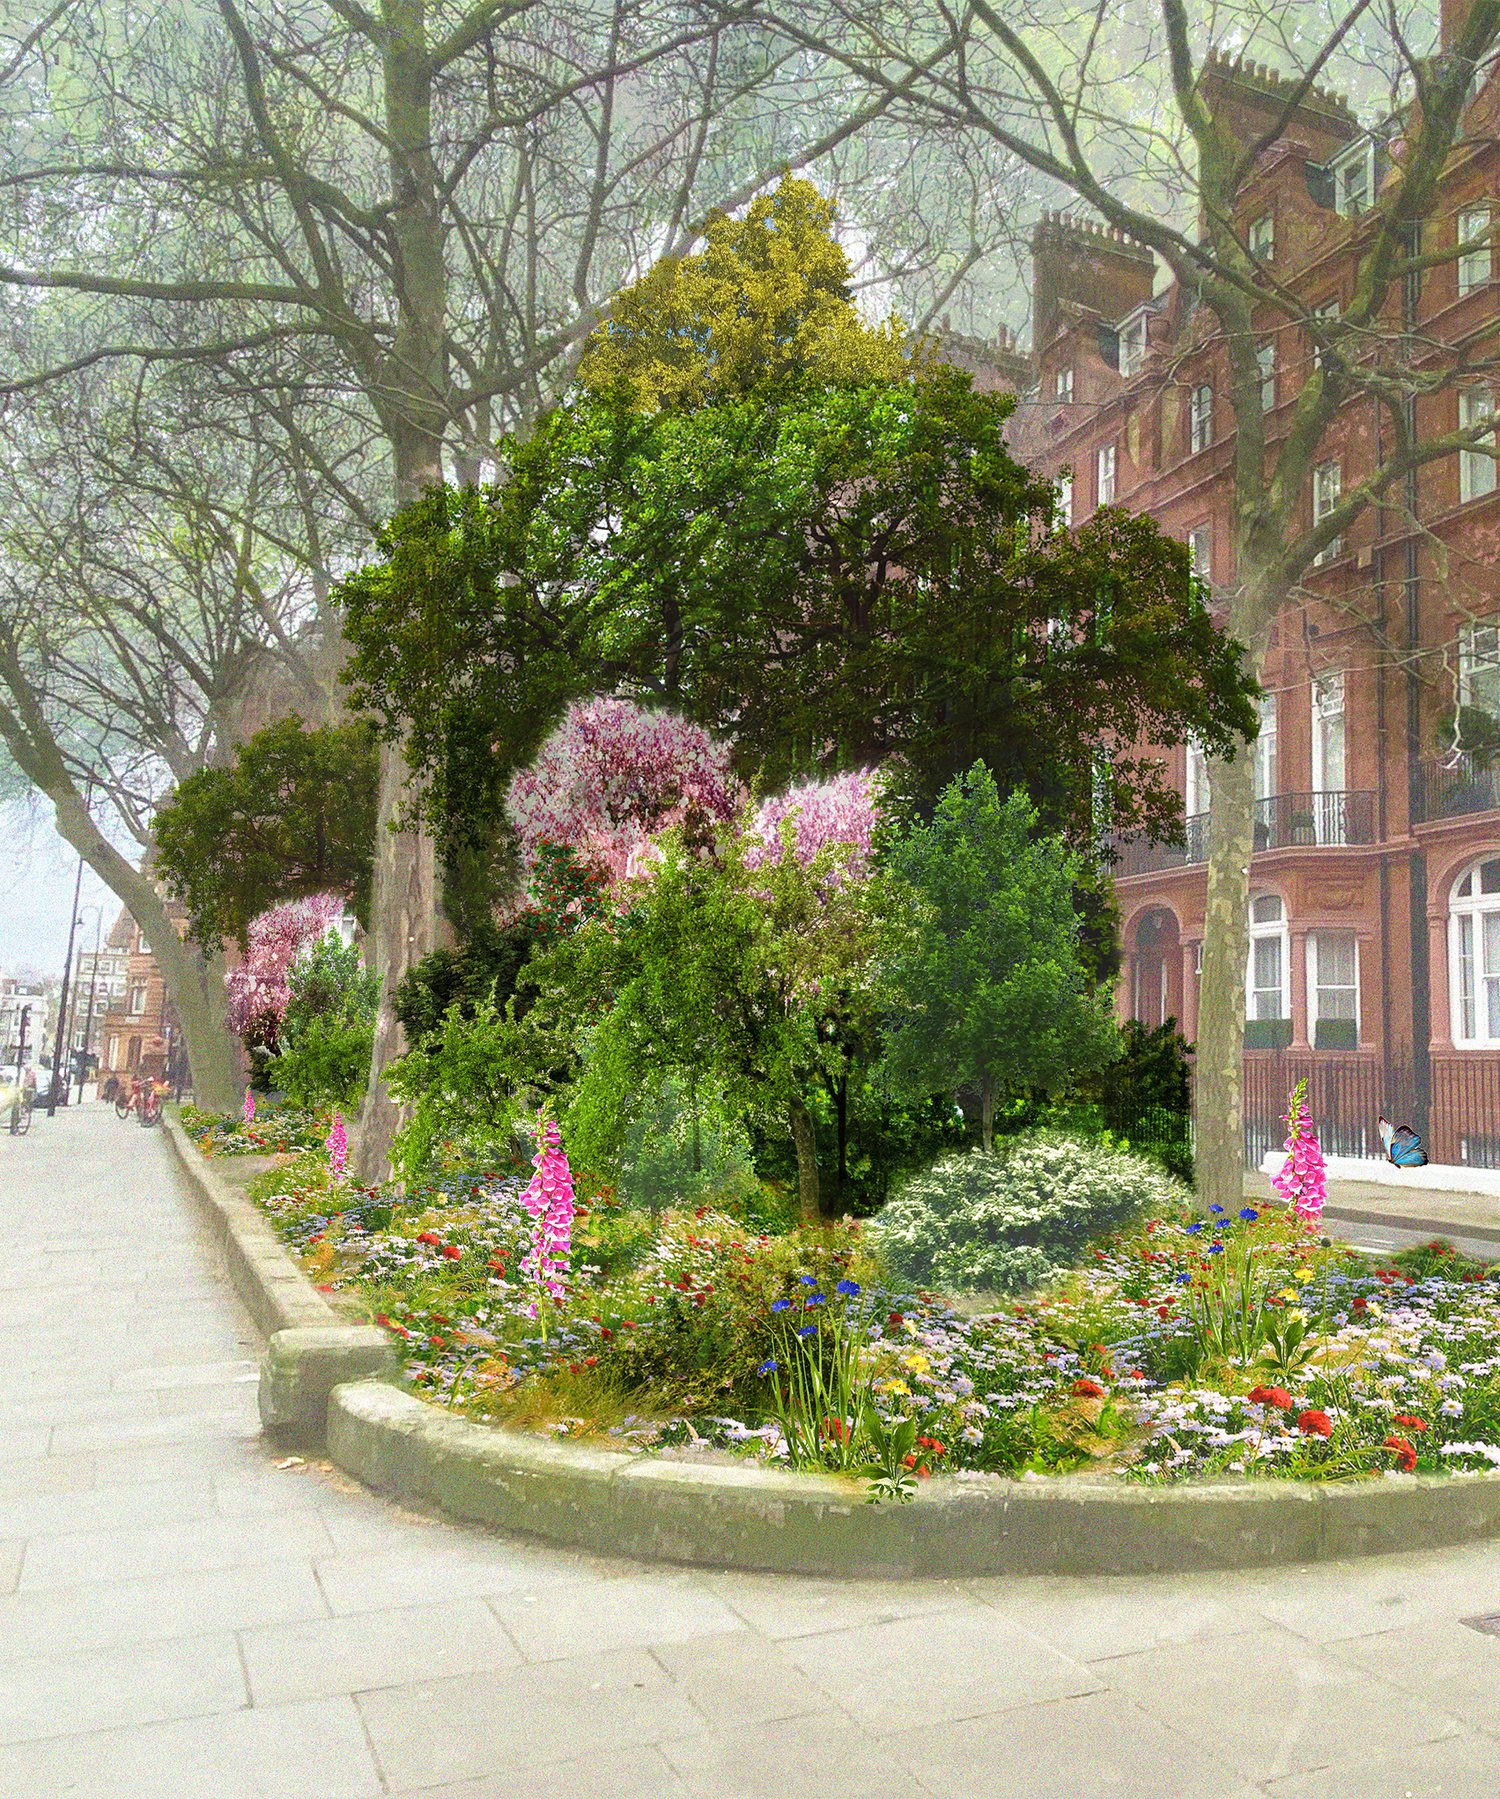 Full Grown with Louis Vuitton for Chelsea in Bloom! - Full GrownFull Grown